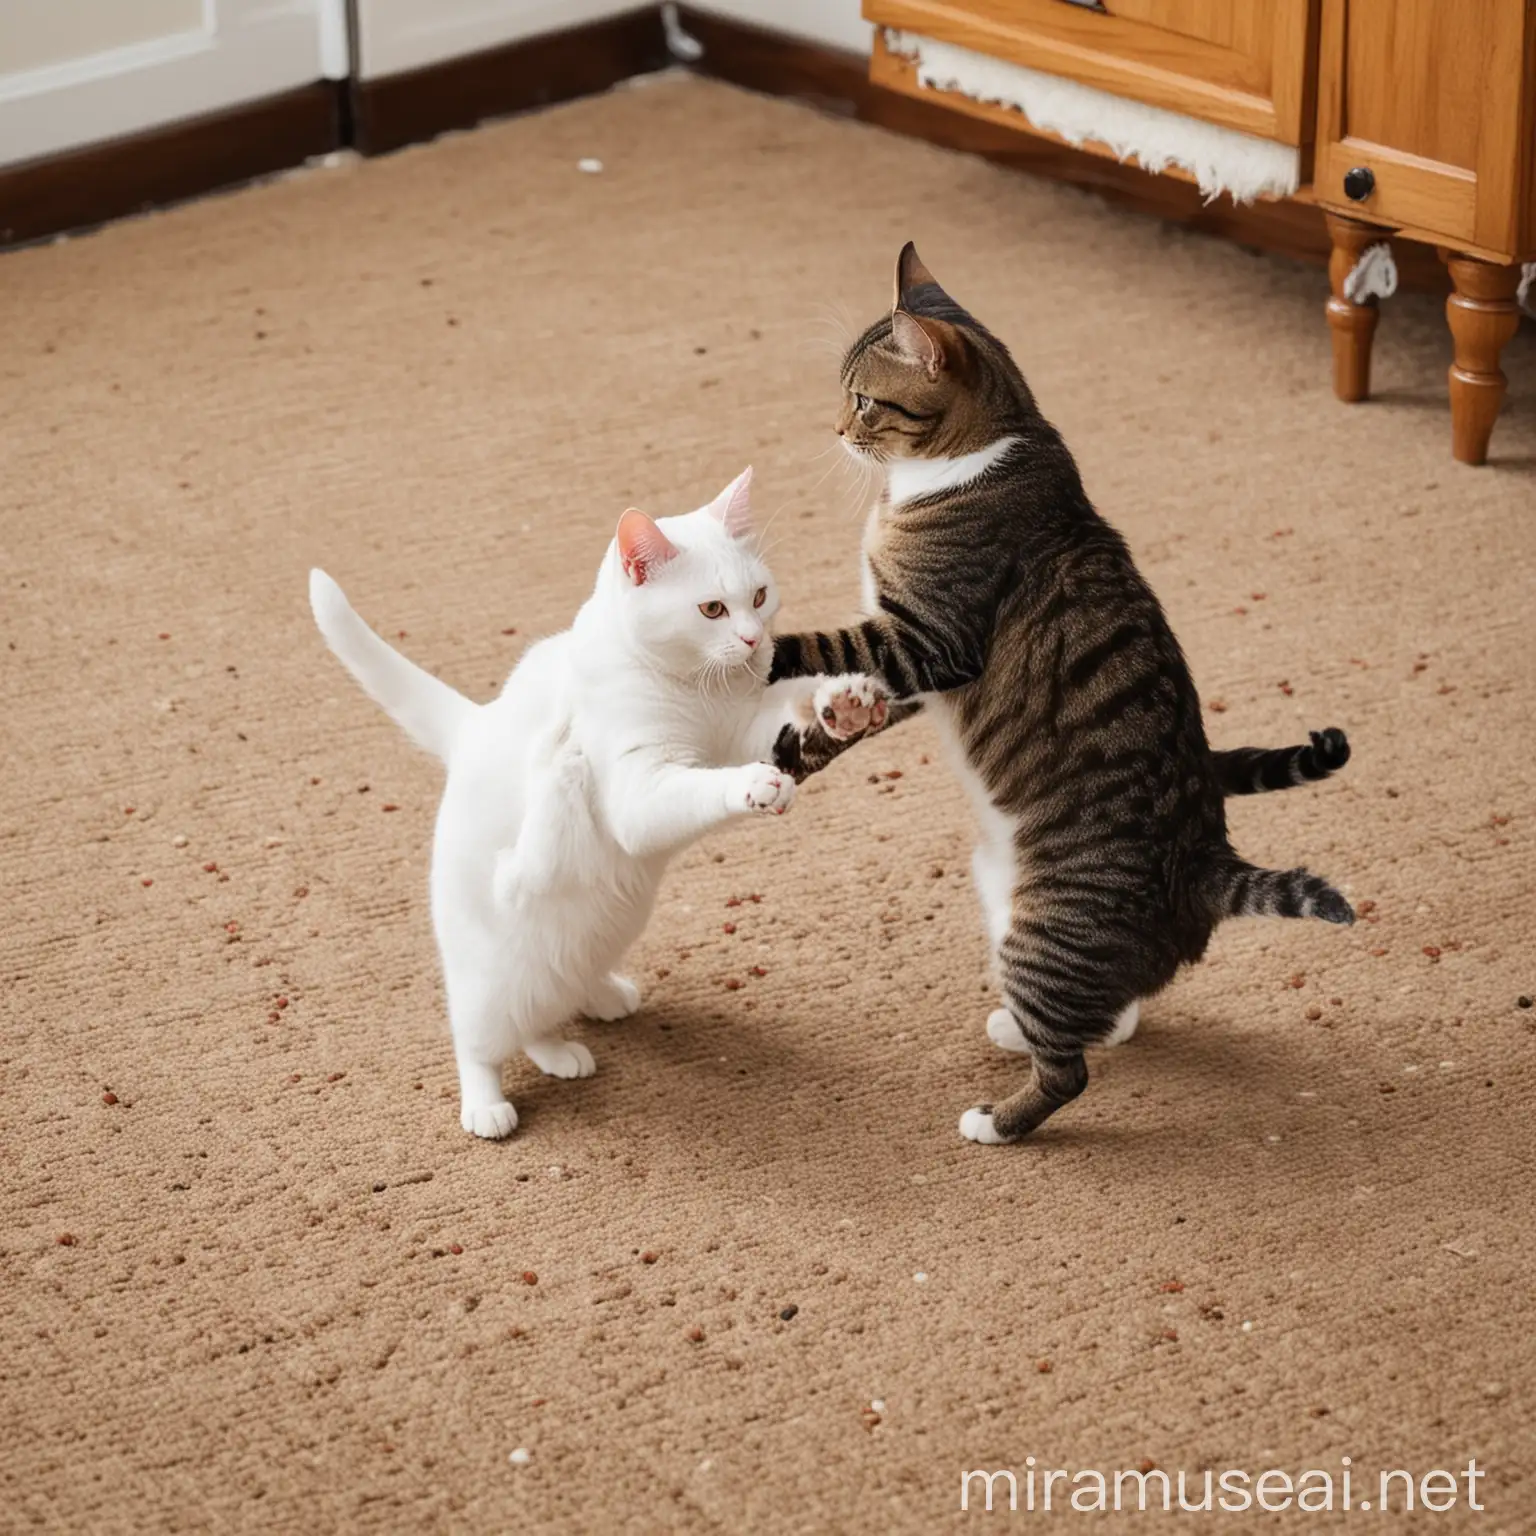 Capture clips of your cats engaging in playful wrestling matches, where they bat at each other's paws and roll around on the floor.